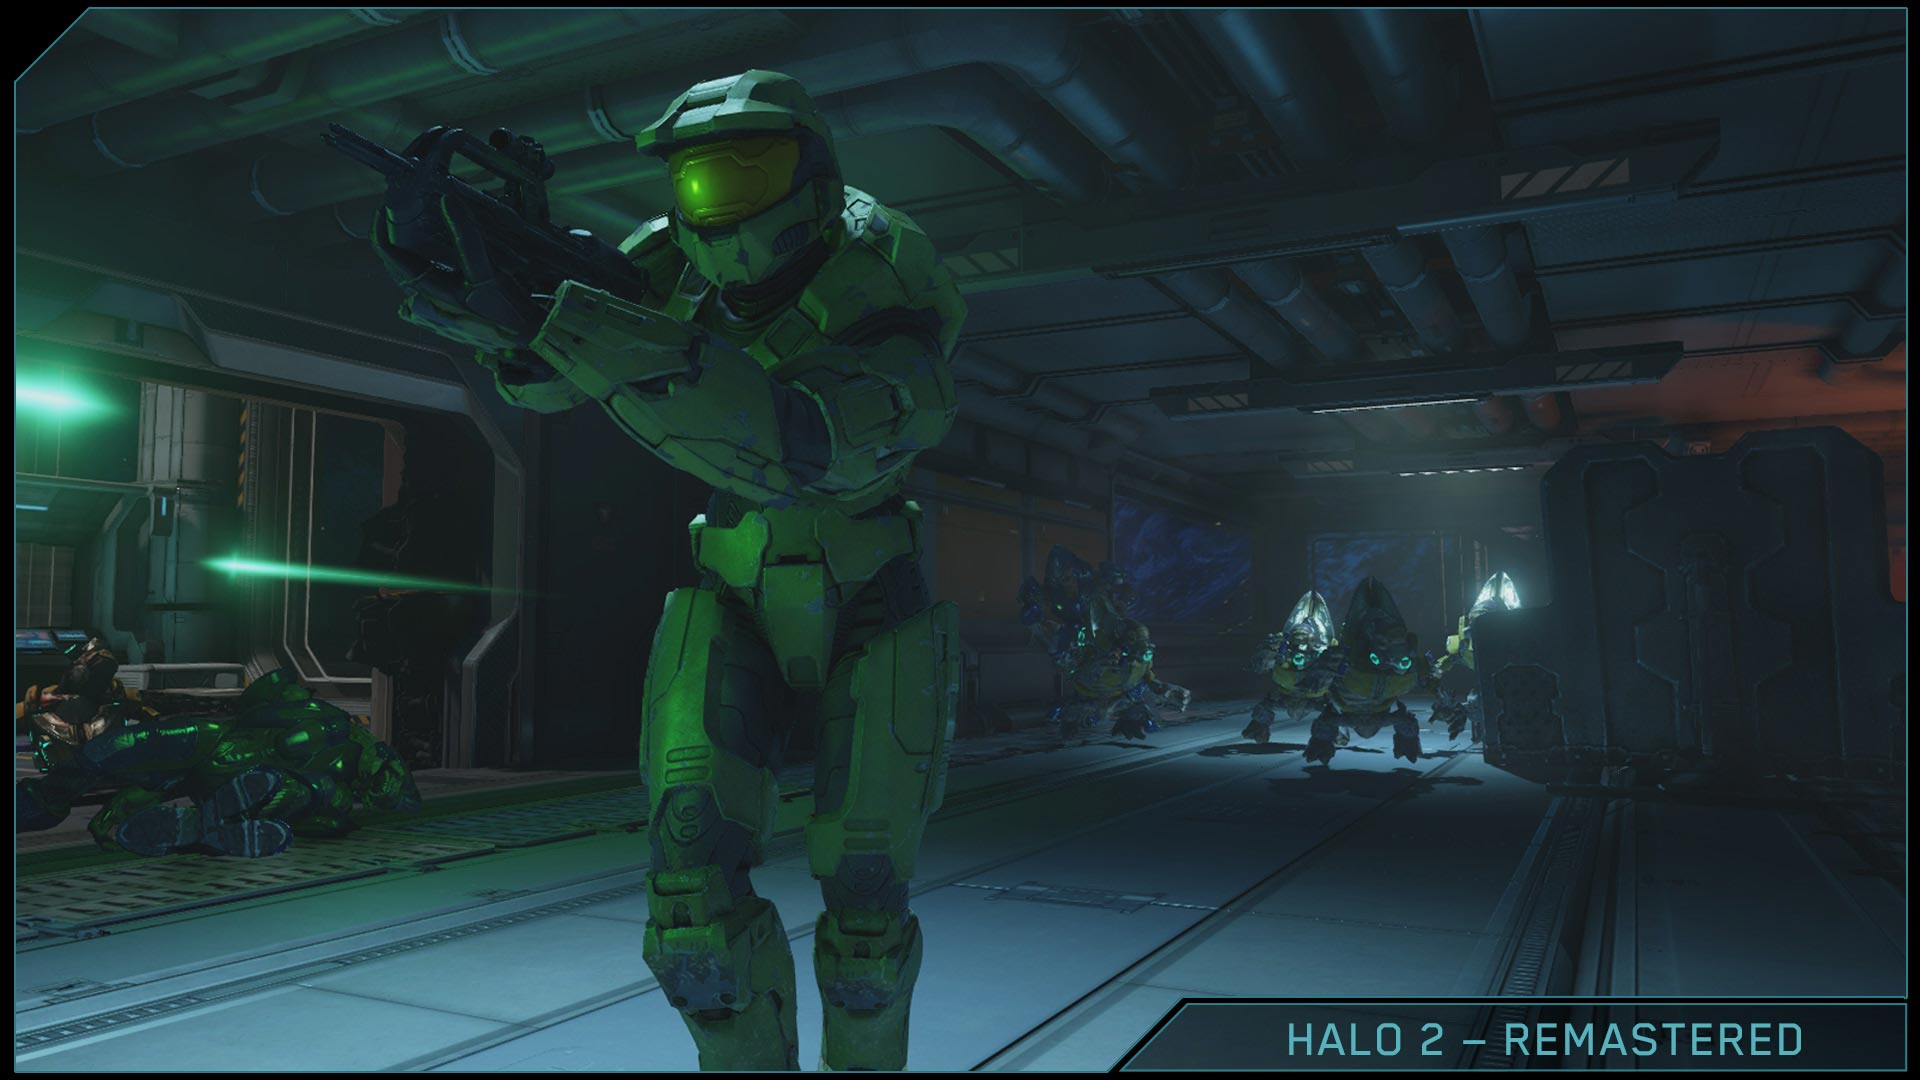 e3-2014-halo-2-anniversary-comparison-this-way-to-the-rec-center-remastered-35cf811388004ea18a8765d221f7458f.jpg